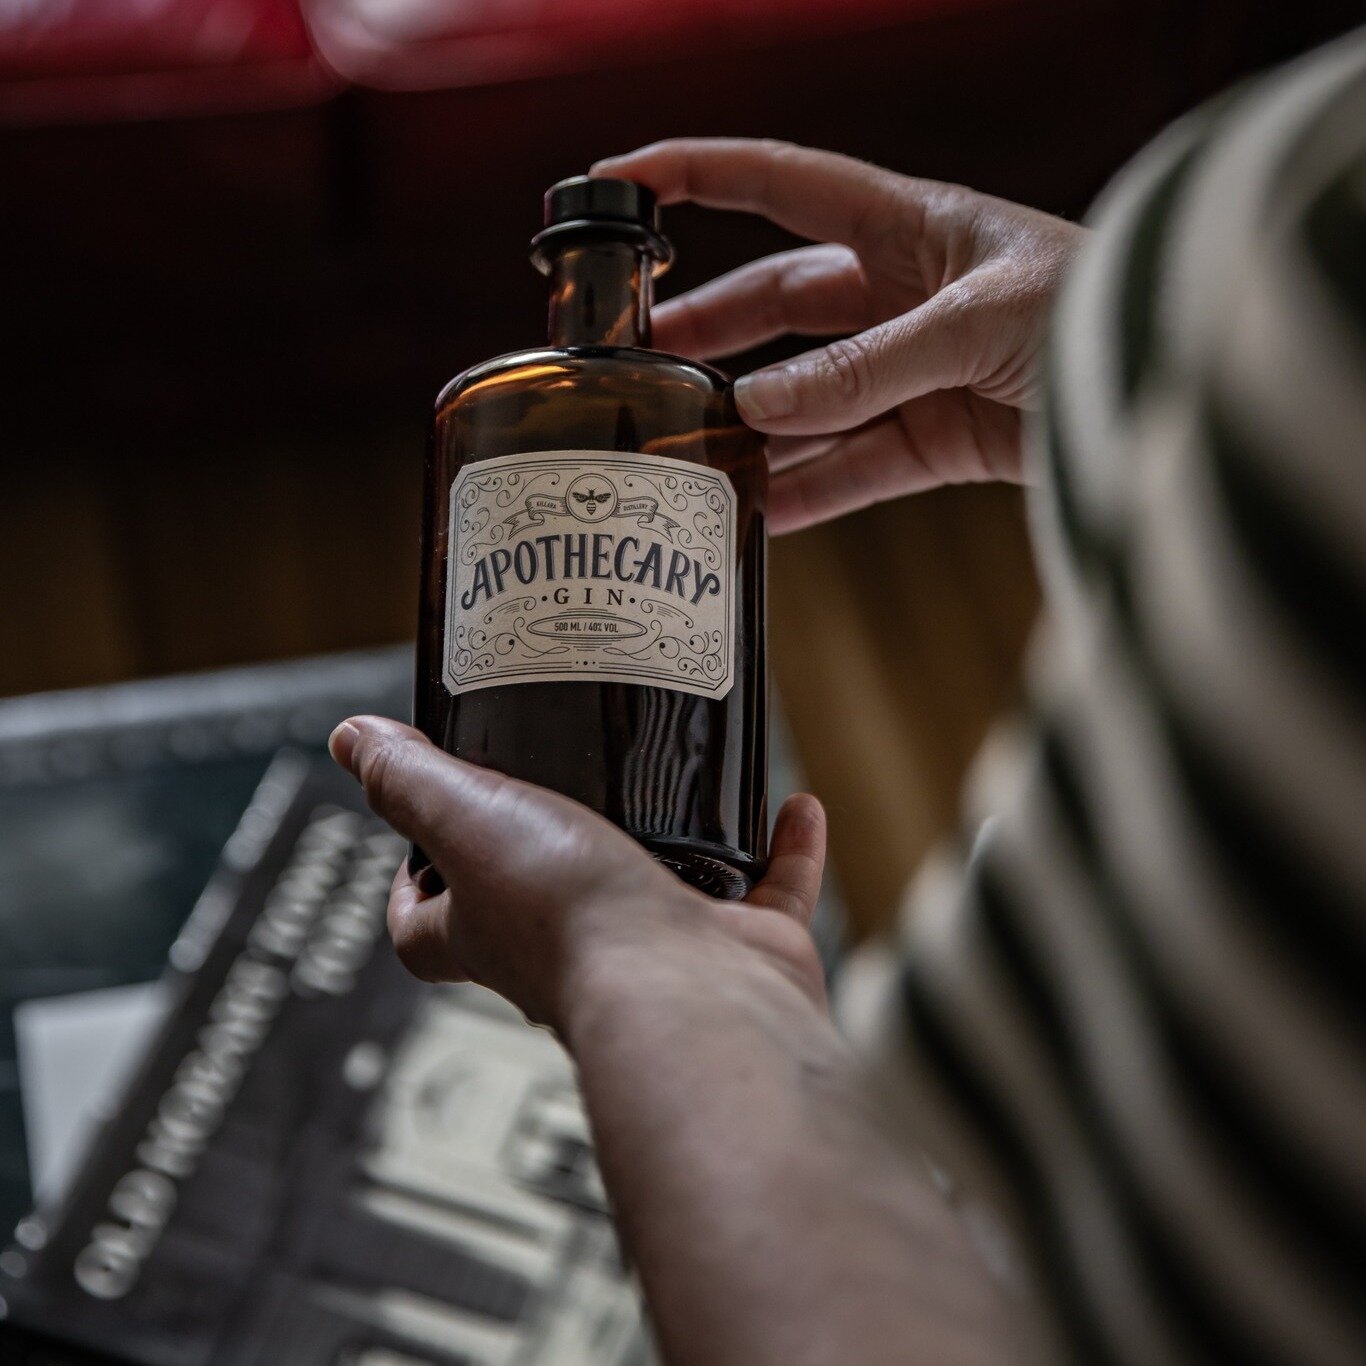 Calling all Gin Lovers.. add a tour of Killara Distillery on your next stay with us, or a Gin gift pack if you prefer to just stay in the room 😉
.
.
.
#tassie #tassiestyle #tasmania #relax #anotherdayinparadise #discovertasmania #lonelyplanet #comed